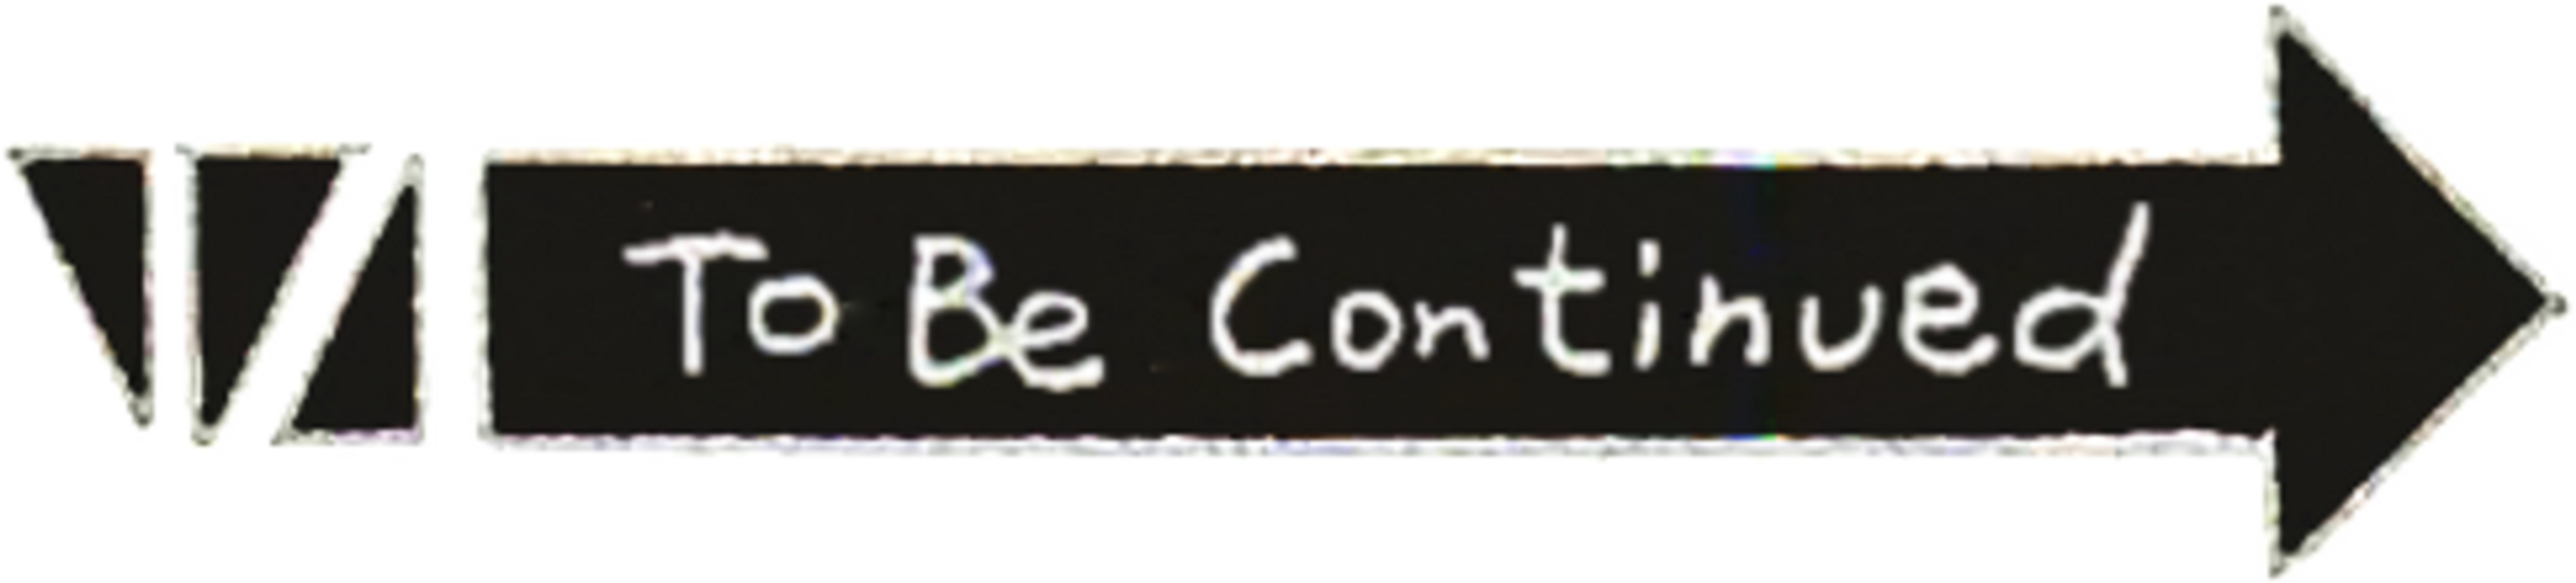 An arrow pointing to the right, containing the words "To Be Continued"